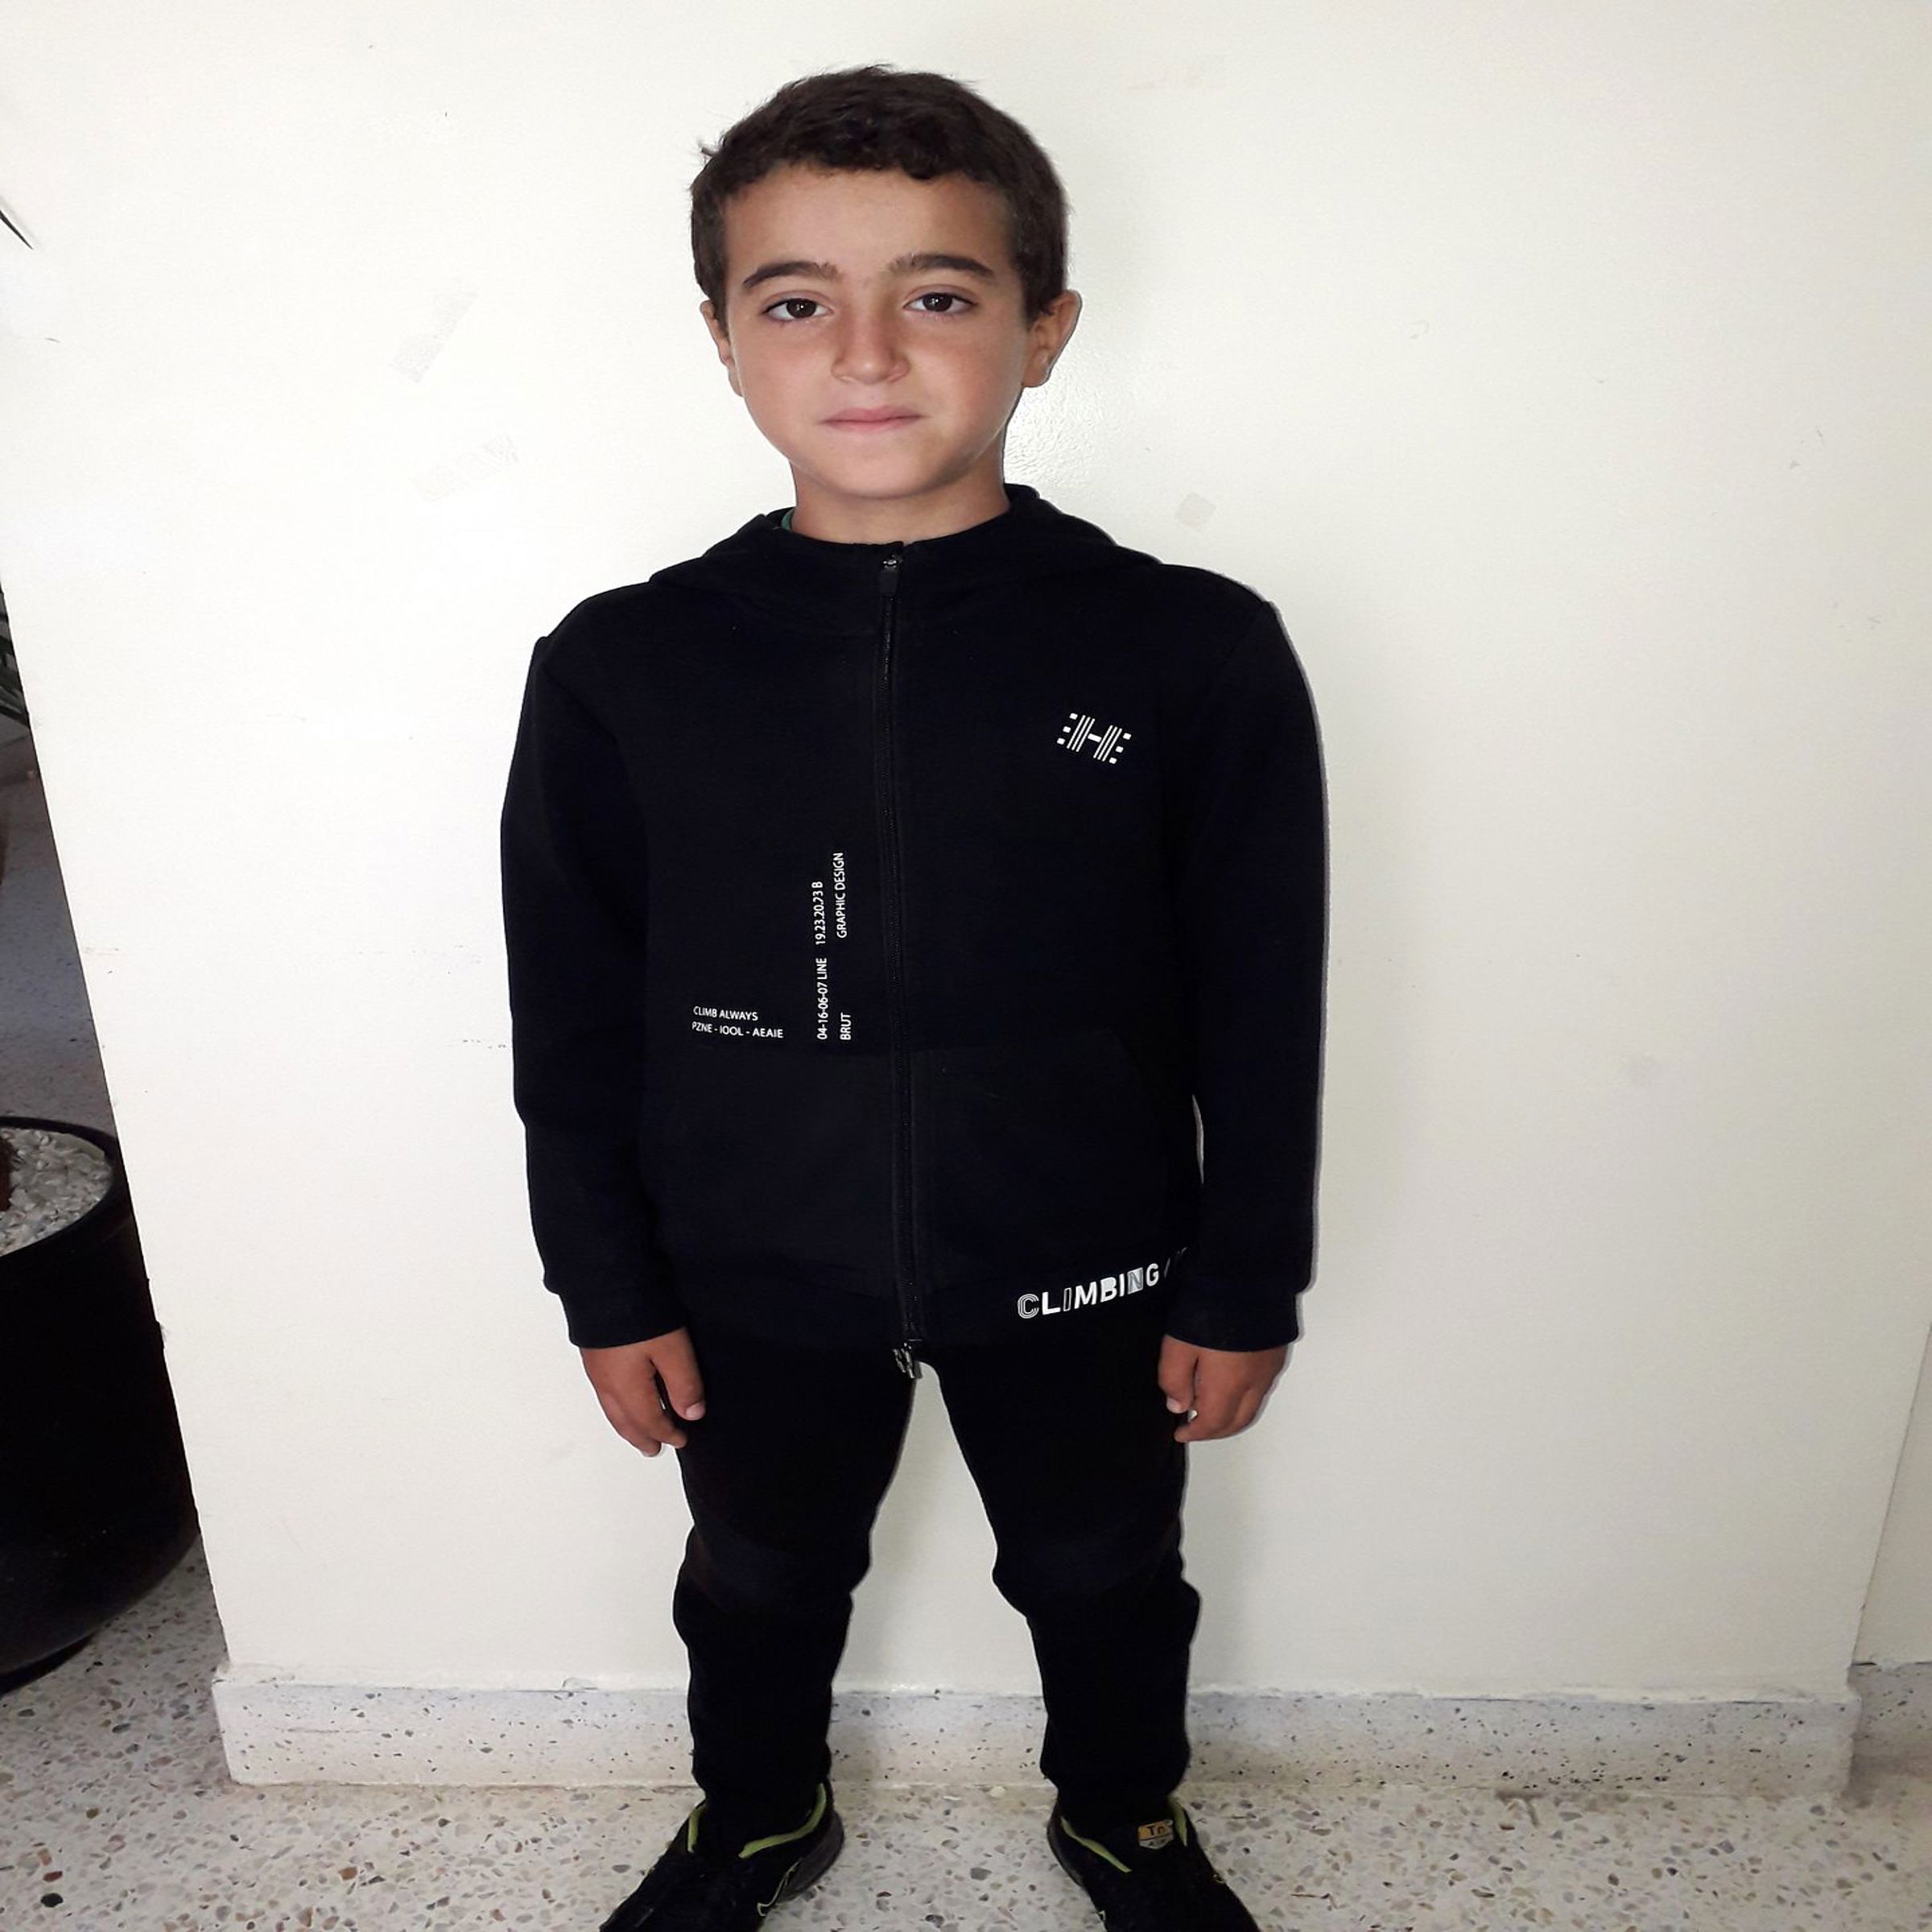 Human Appeal Orphan - Youssef